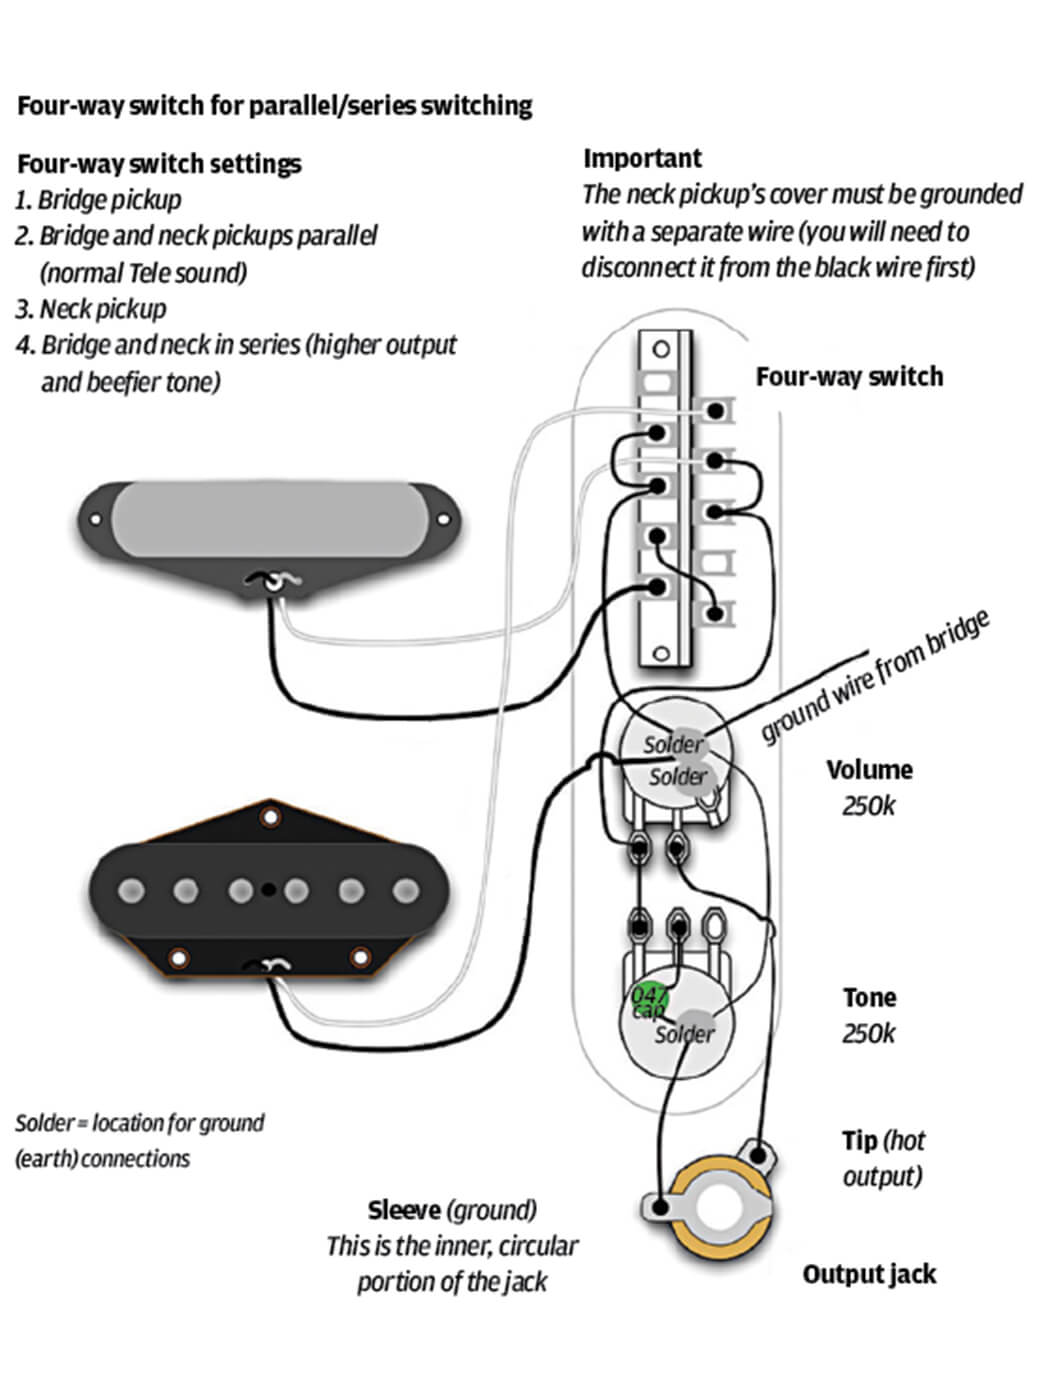 Fender Telecaster Two Pickup 7 Way Switch Reverse Wiring Diagram from guitar.com